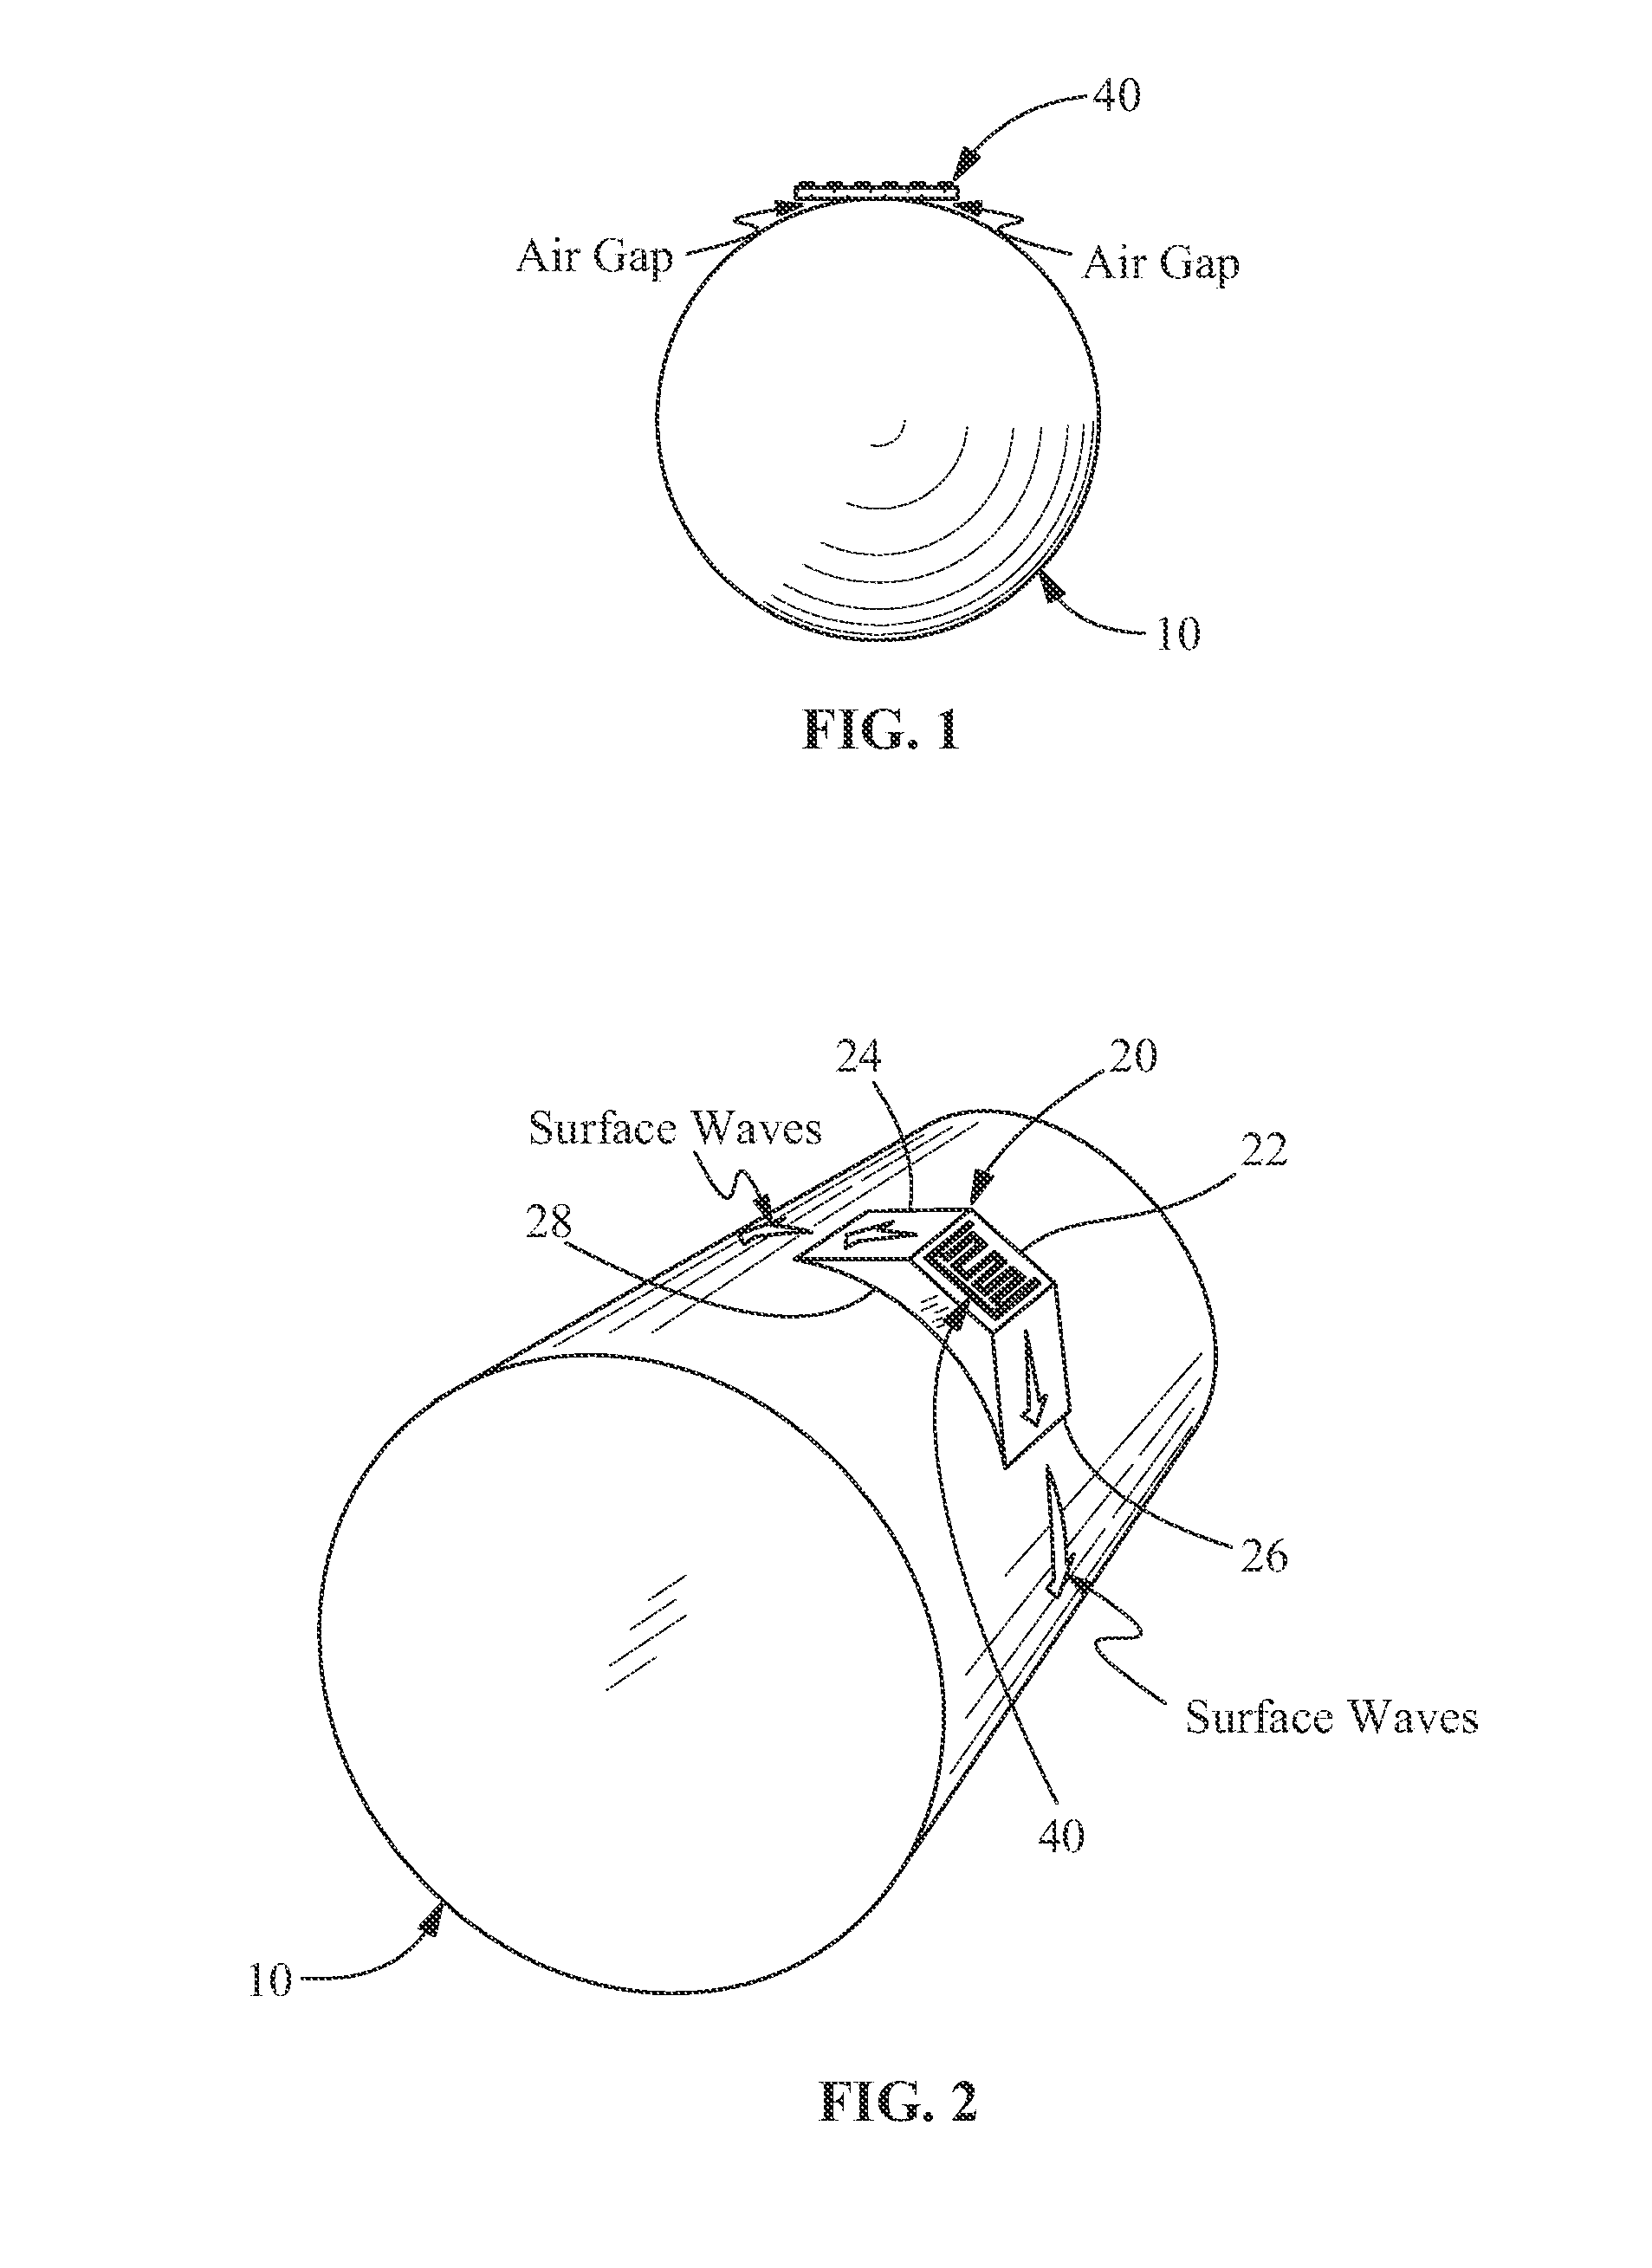 Acoustic coupling shoes for use in inspecting non-flat surfaces